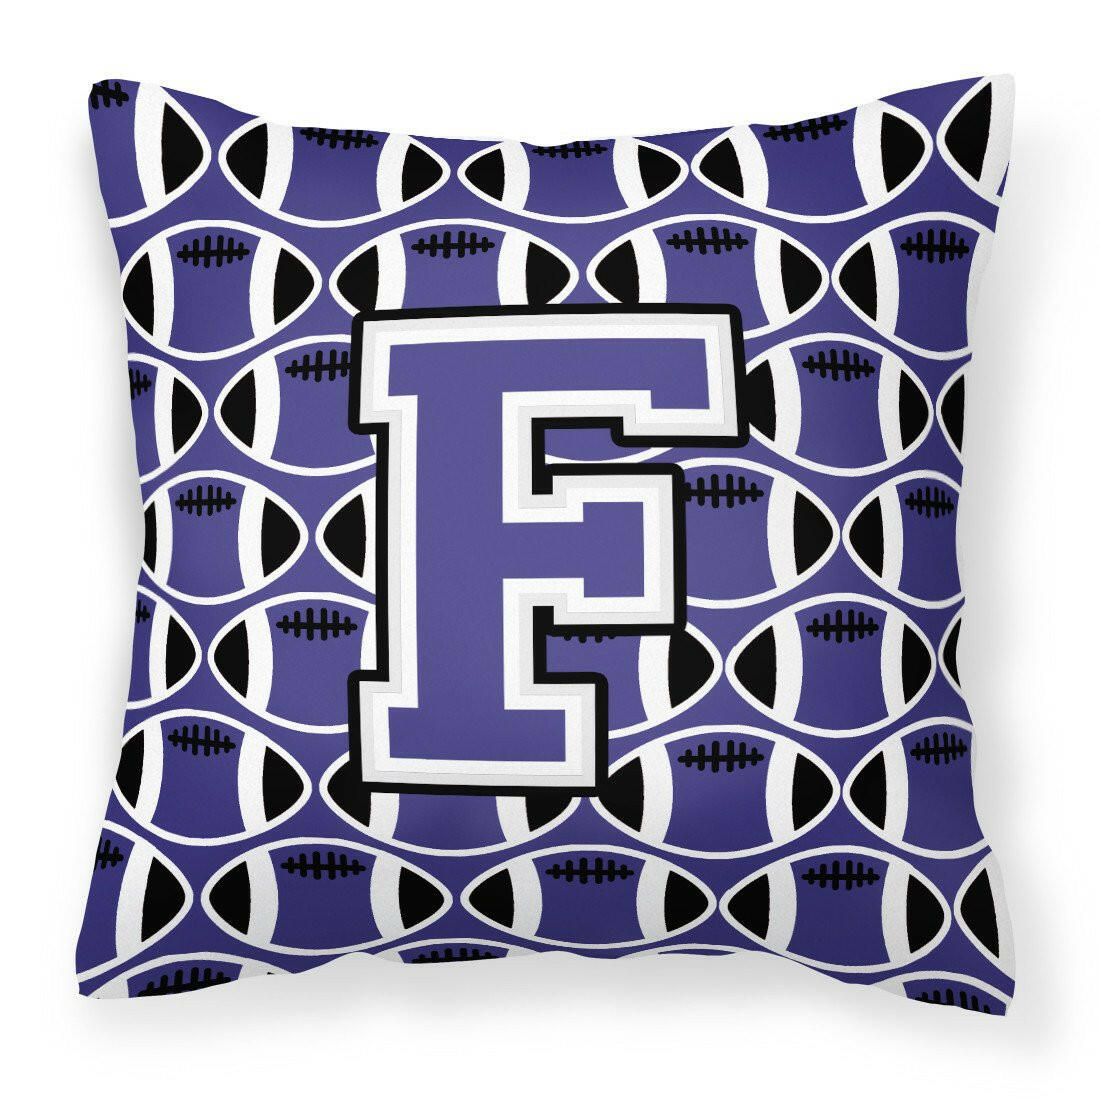 Letter F Football Purple and White Fabric Decorative Pillow CJ1068-FPW1414 by Caroline's Treasures